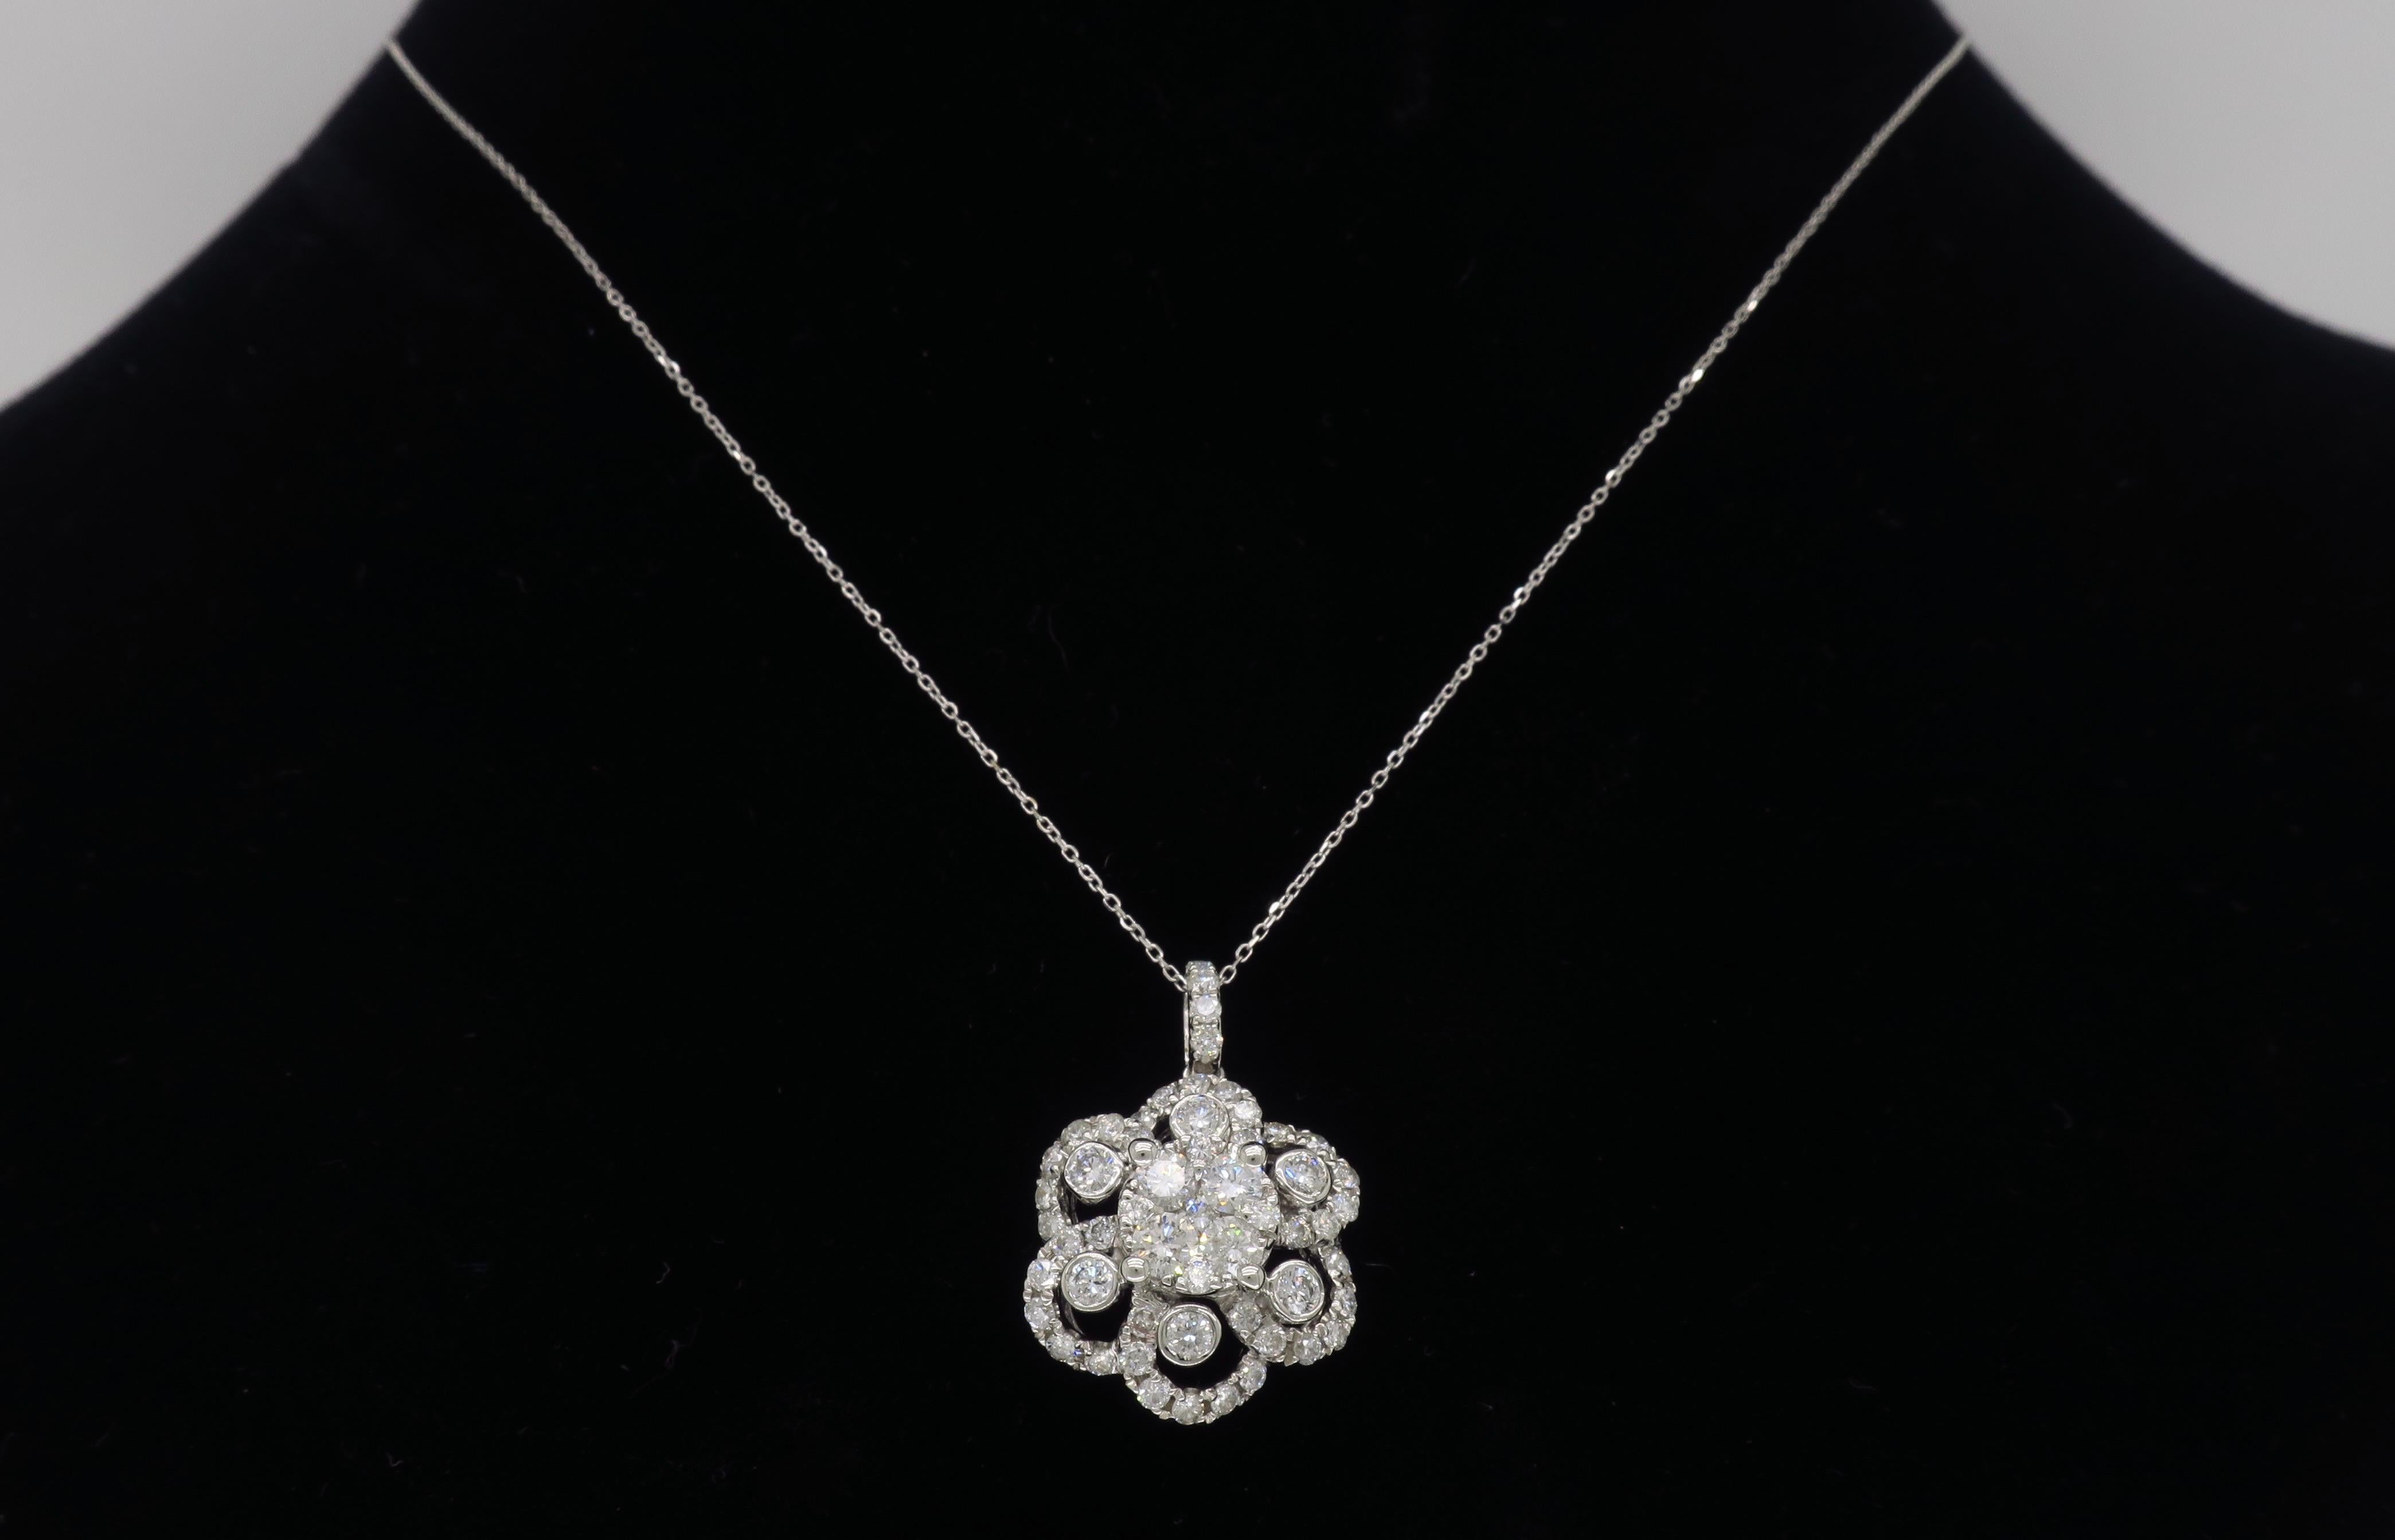 Floral Diamond Pendant Necklace in White Gold 1